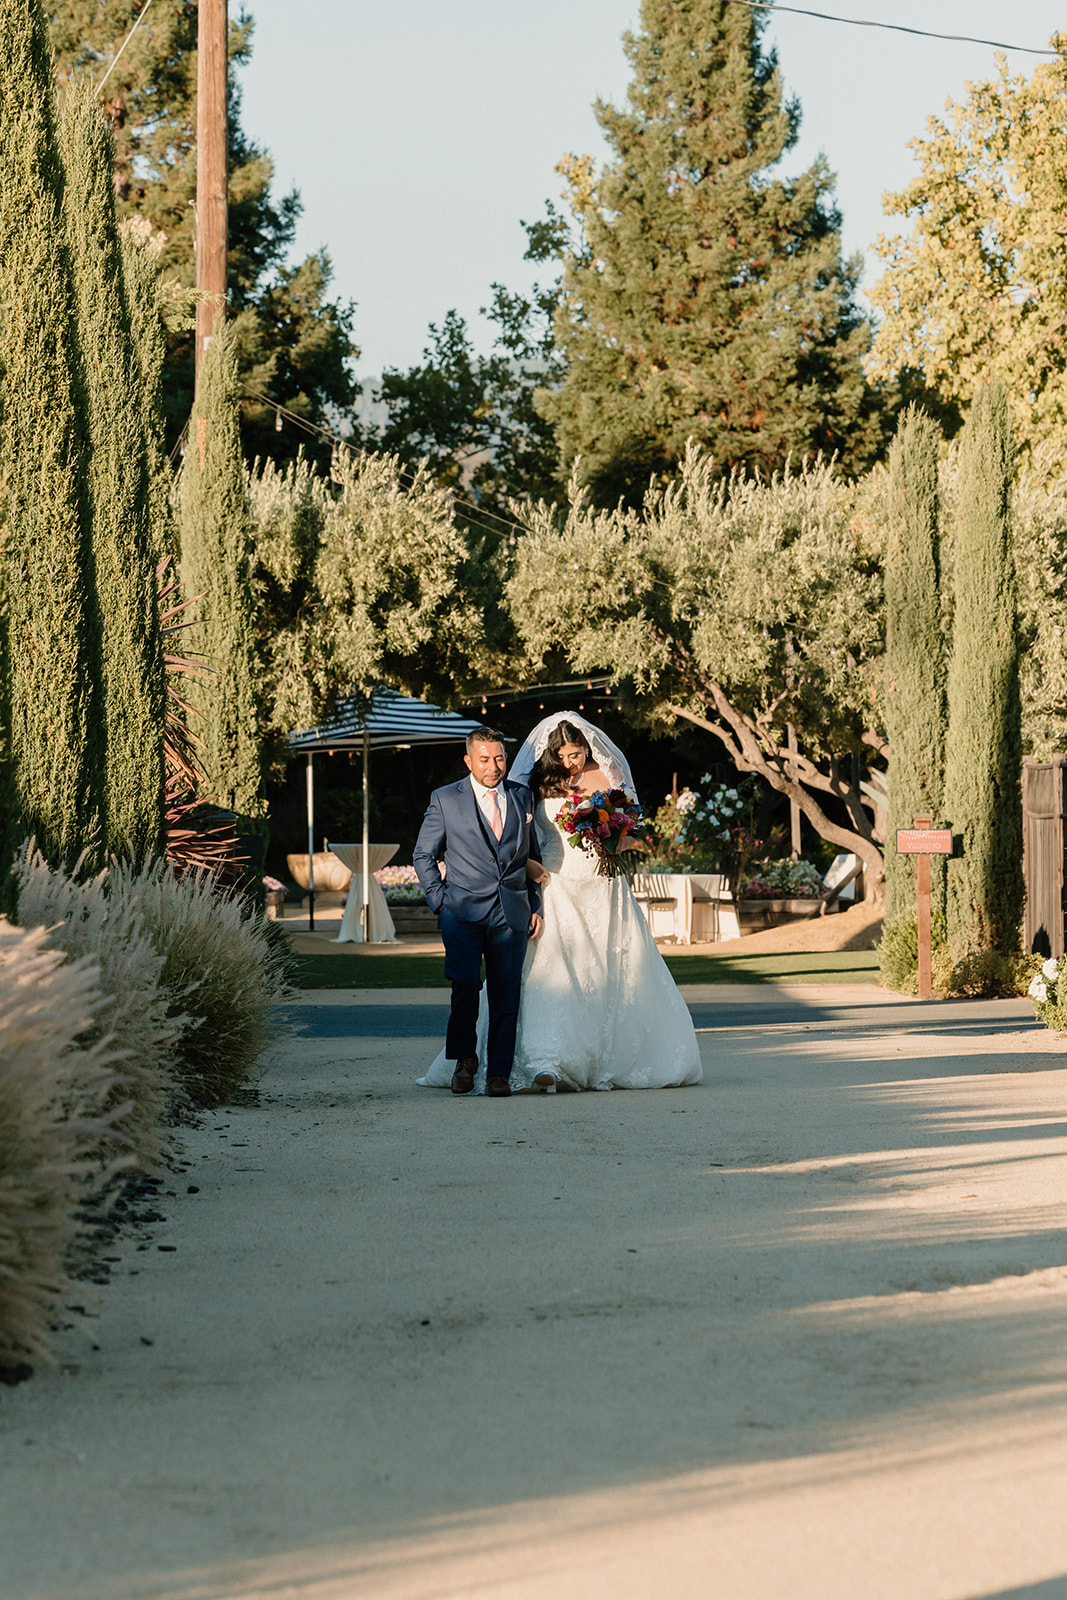 A bride and groom walking hand in hand down a sunlit pathway surrounded by lush greenery and tall trees at Tre Posti wedding venue